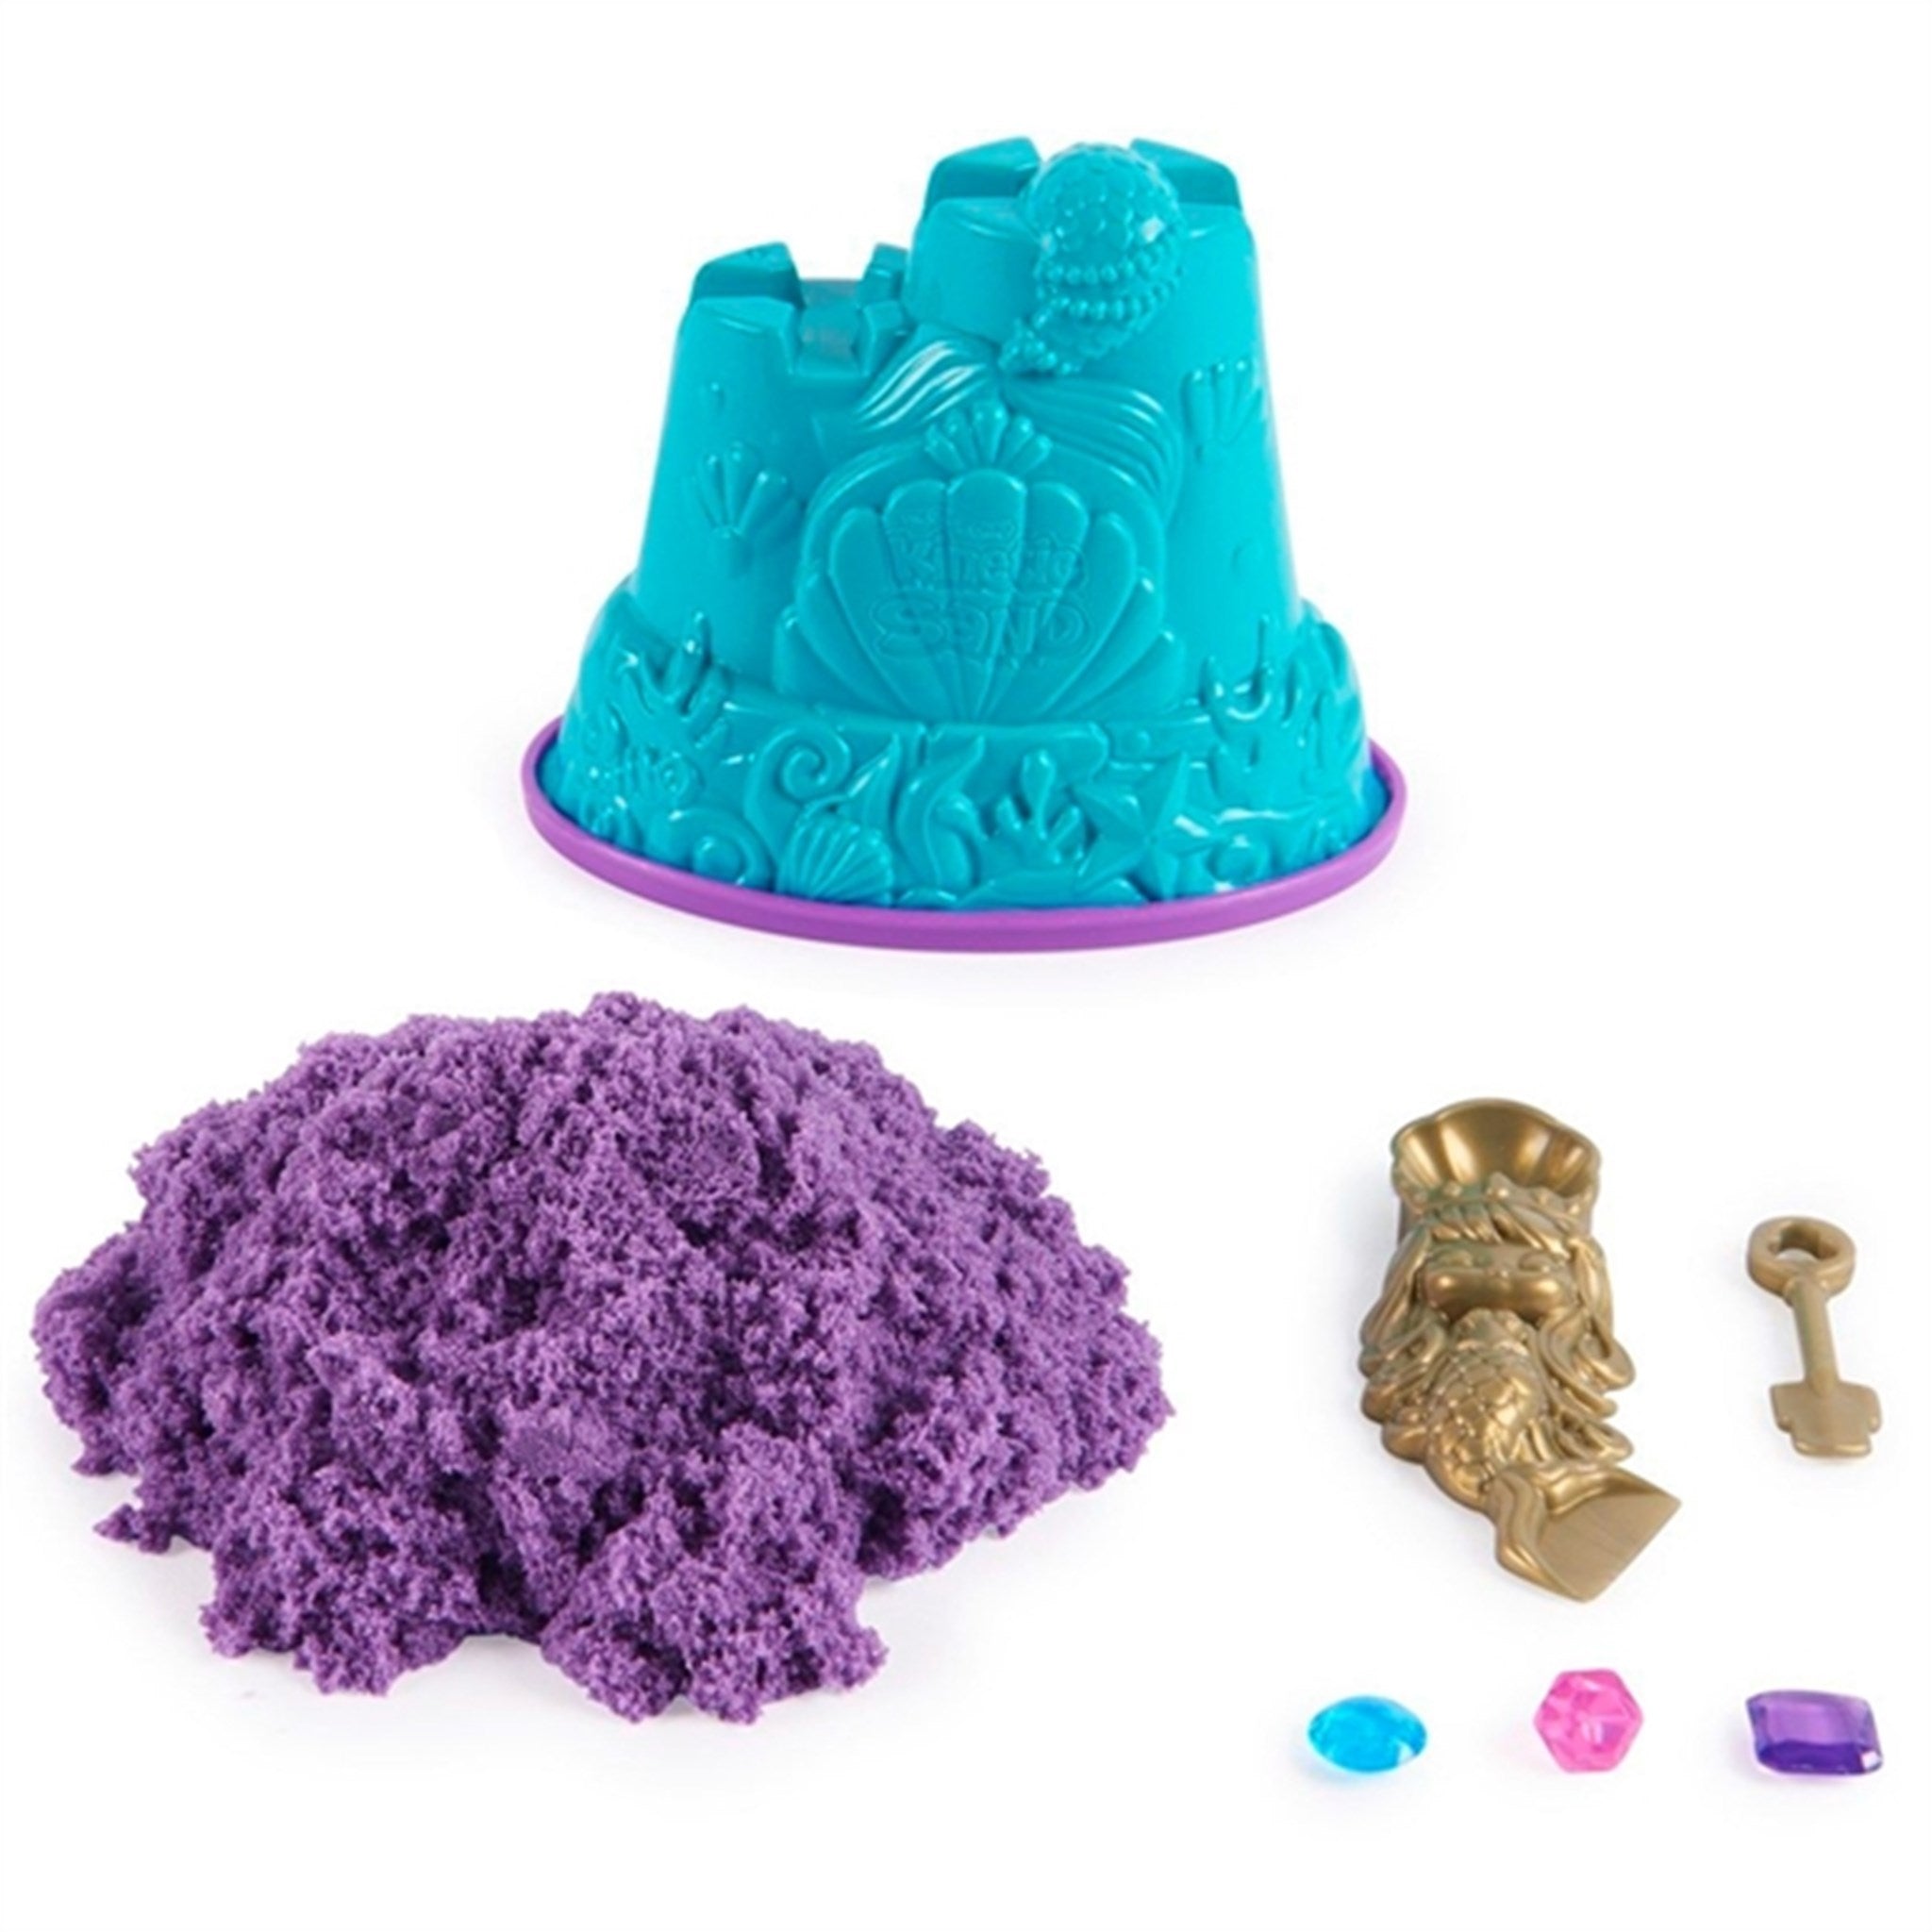 Kinetic Sand Mermaid Container 2